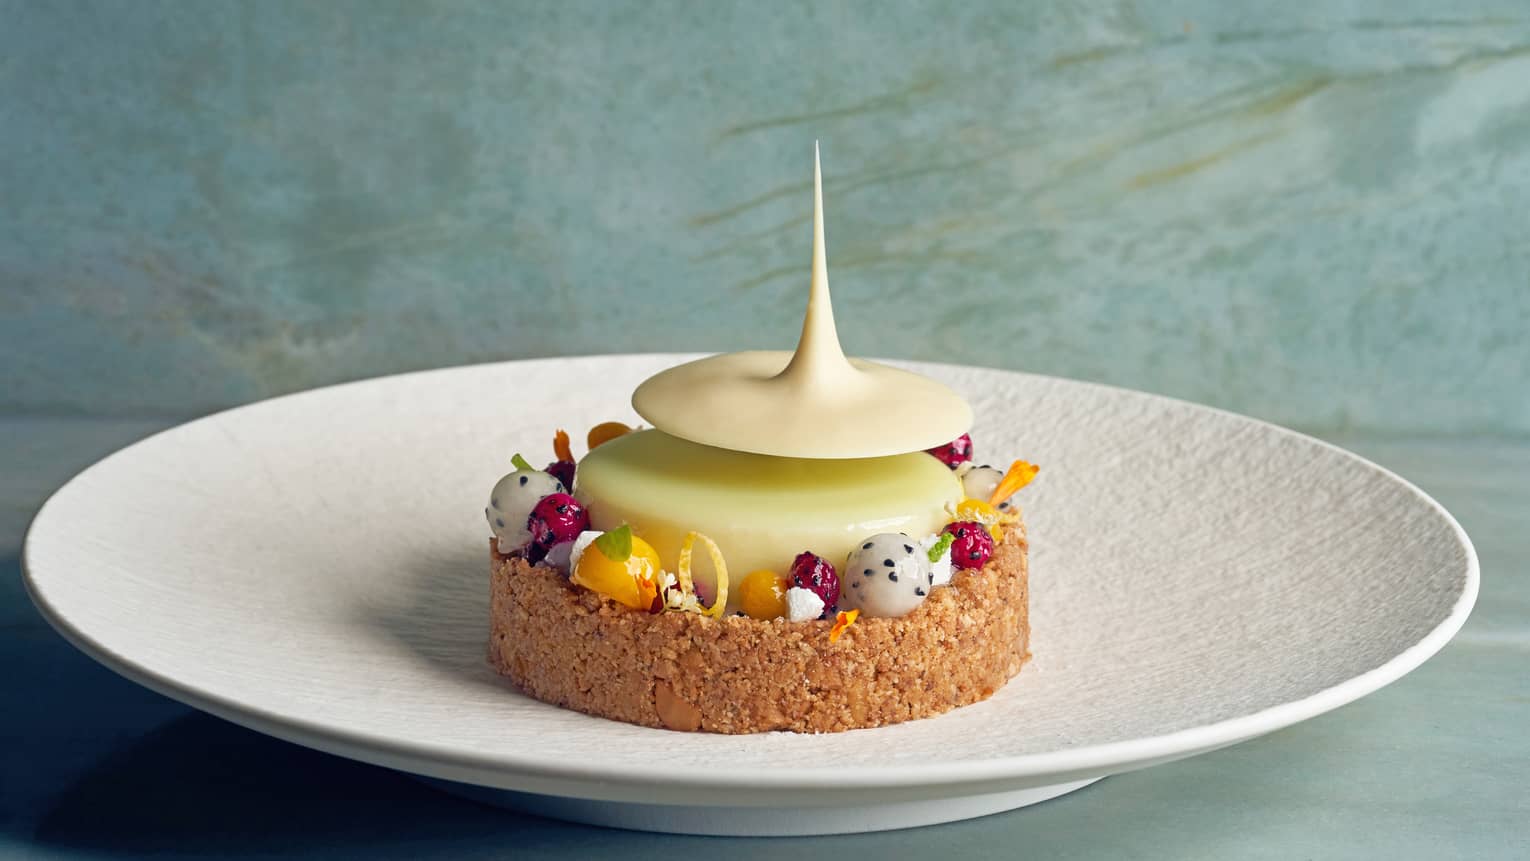 Key lime dessert with balls of dragon fruit and mango, and a macadamia nut–coconut crust